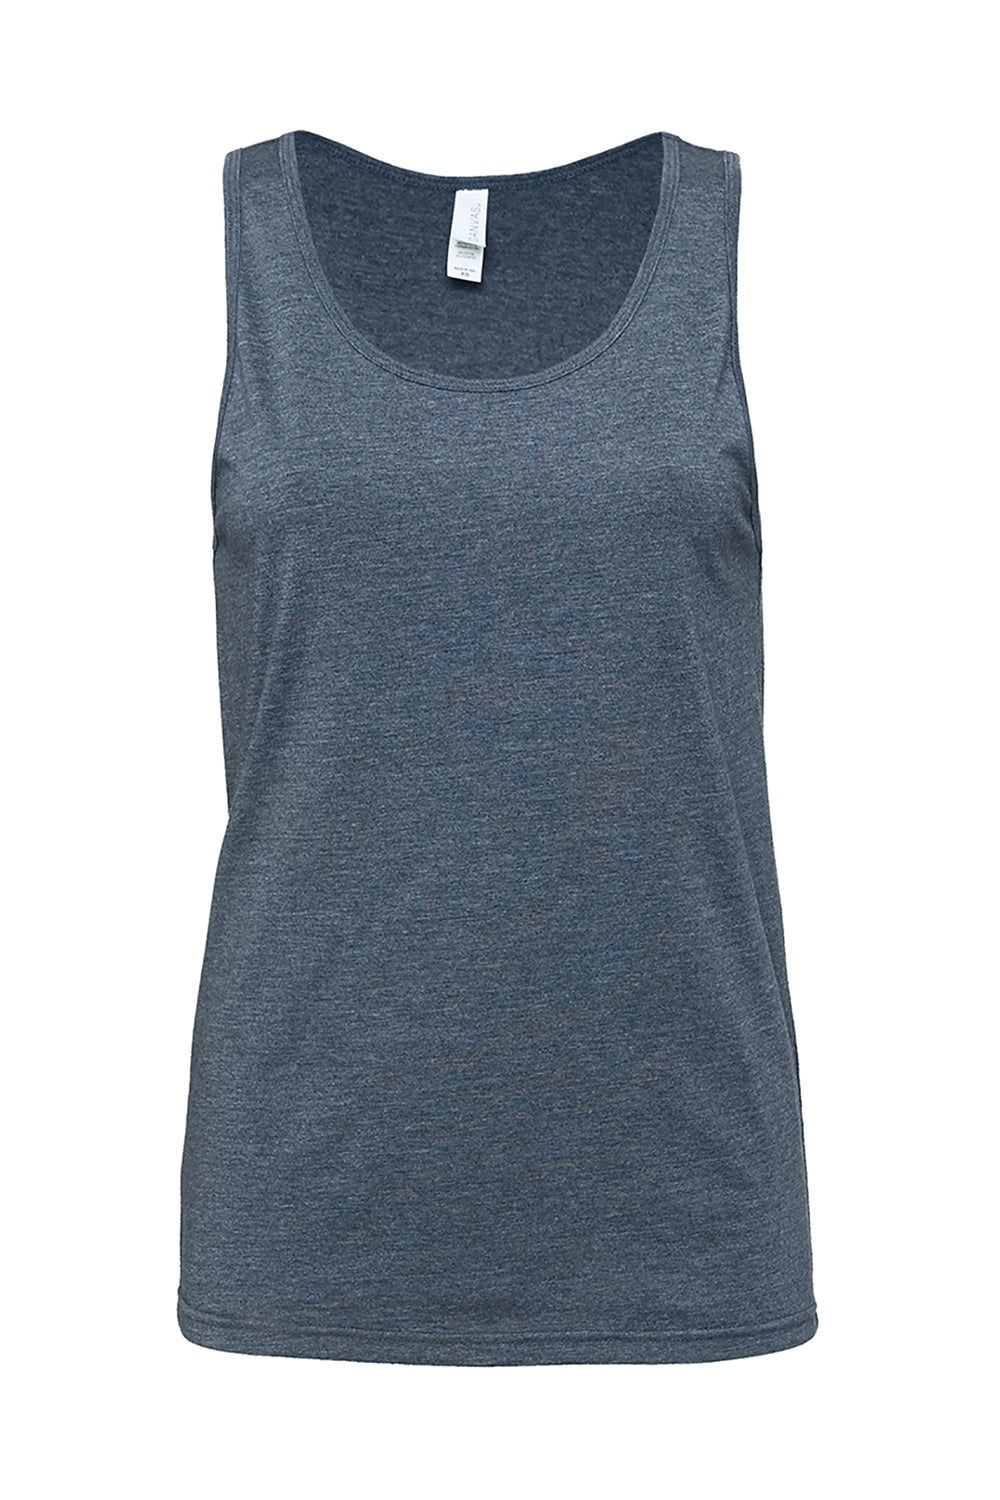 Bella + Canvas BC3480/3480 Mens Jersey Tank Top Heather Navy Blue Flat Front